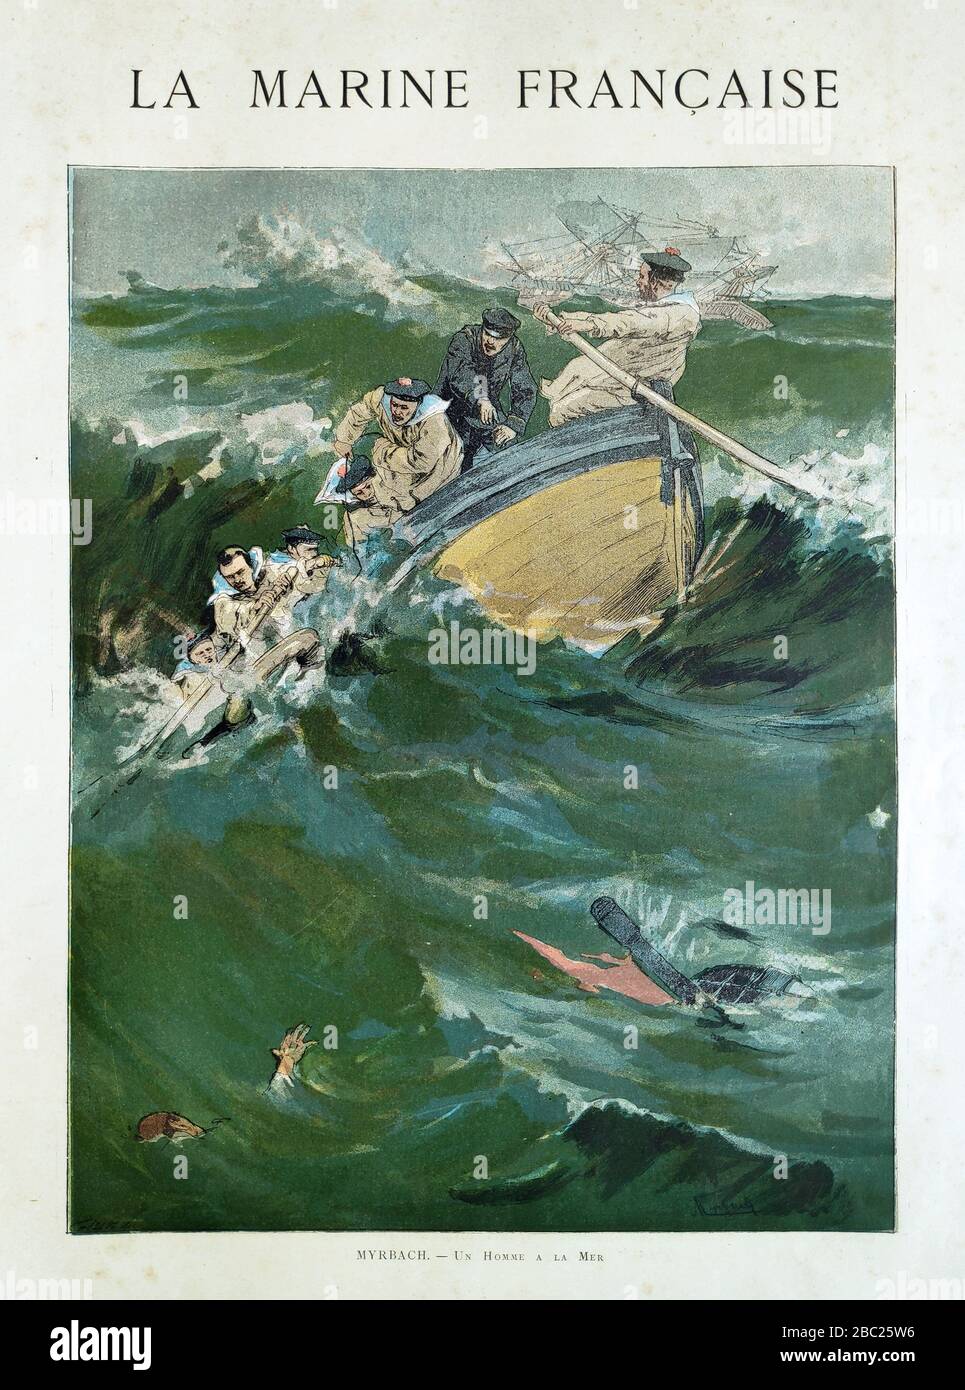 Illustration of sailors rescuing one of their own at sea entitled 'Un homme à la mer' by Felician Myrbach printed in the late 19th century. Stock Photo